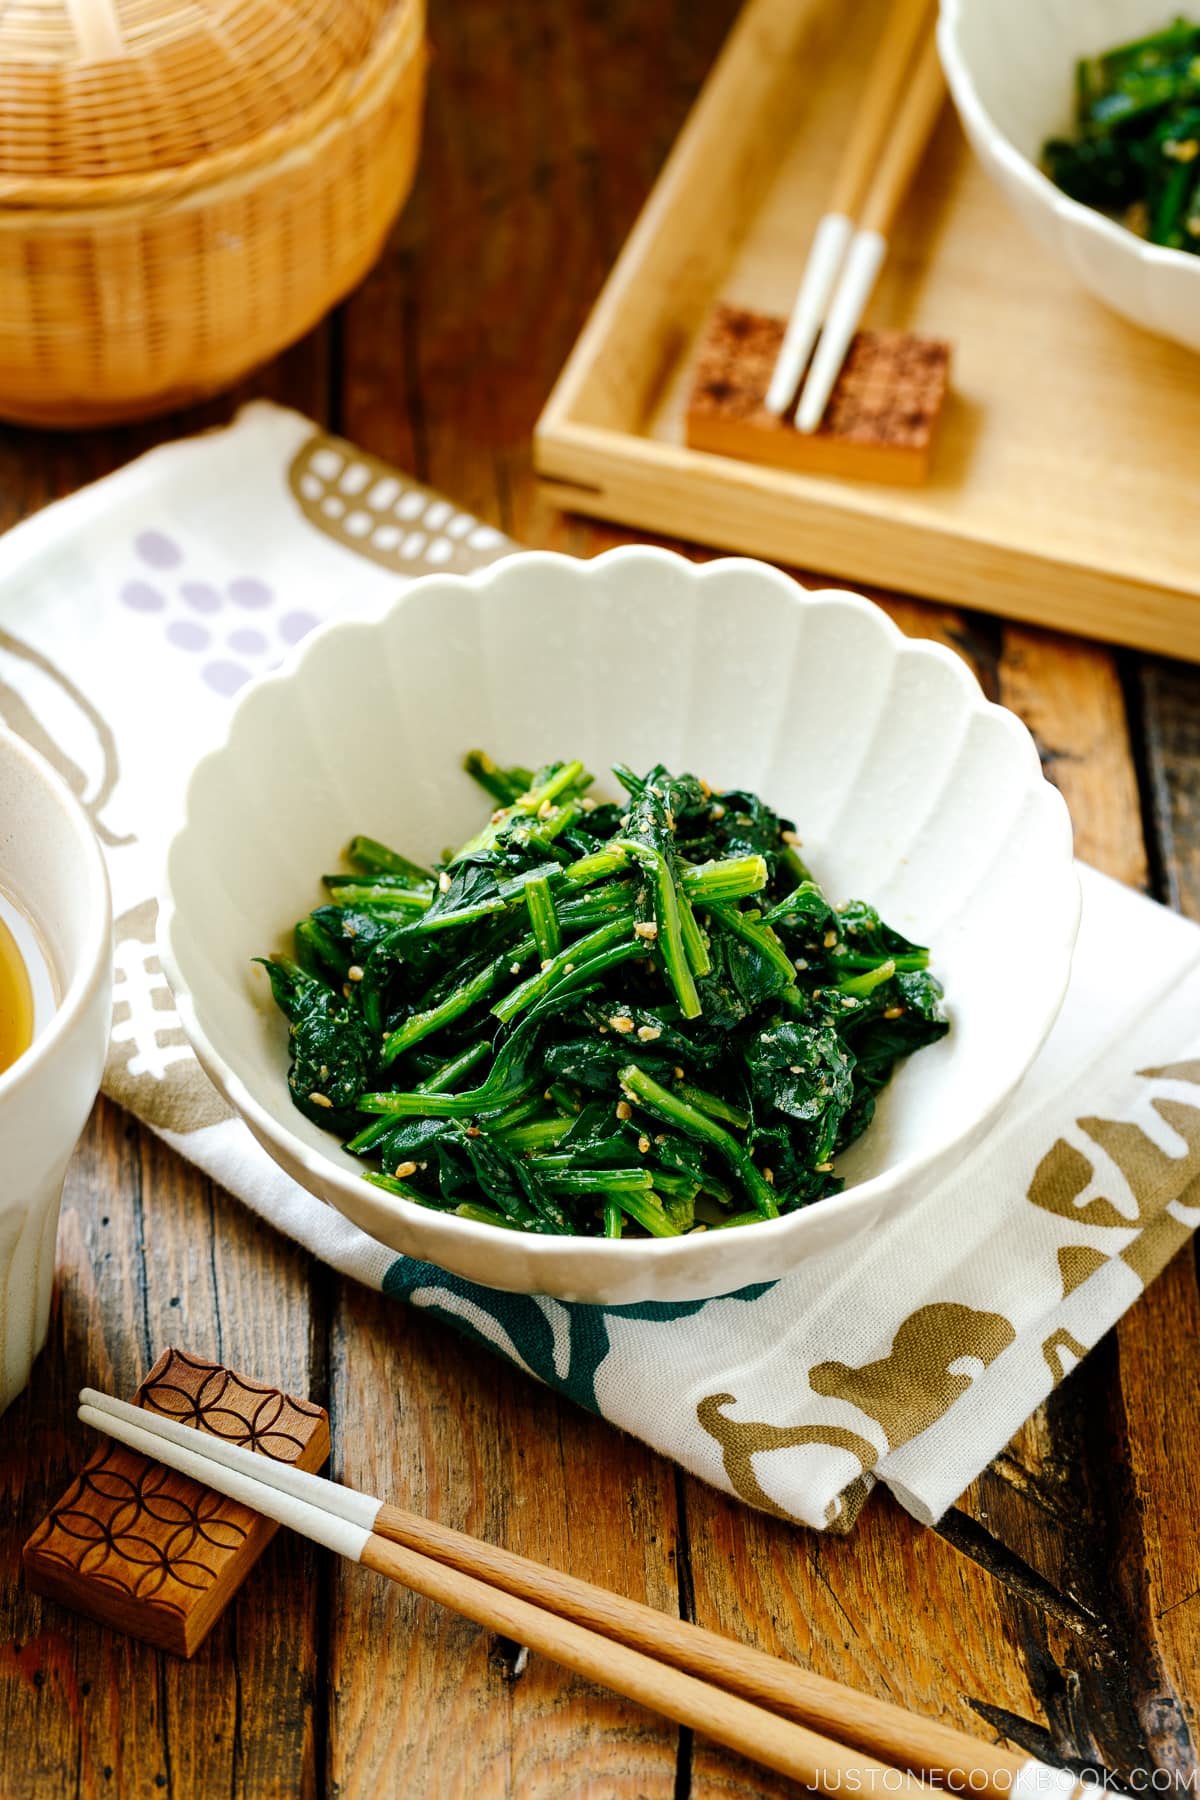 A white fluted dish containing Japanese spinach salad seasoned with sesame seeds, soy sauce, and sugar.